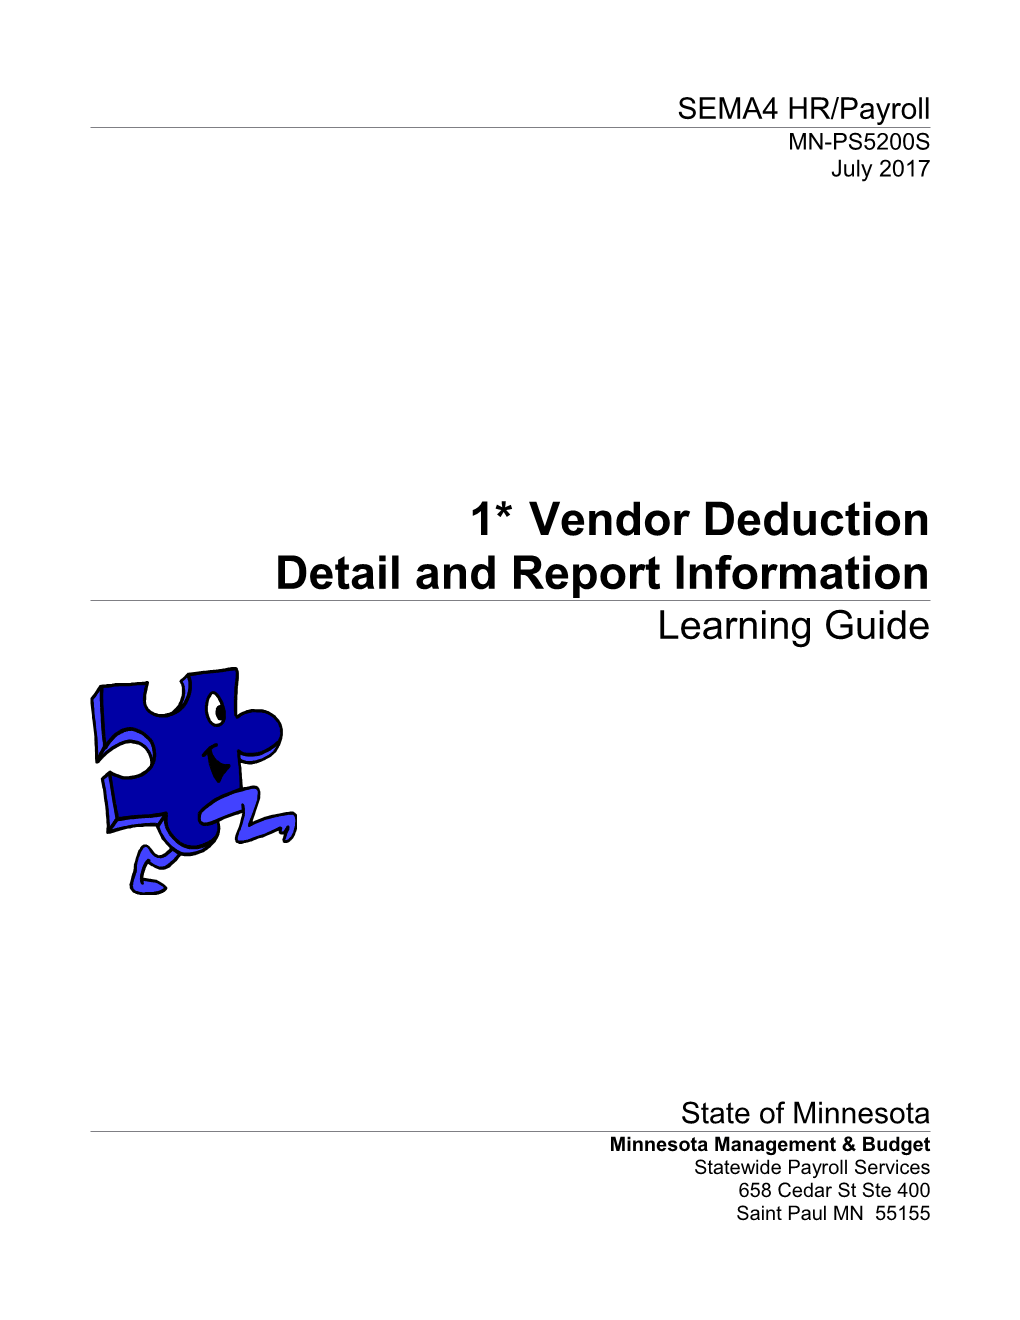 SEMA4 Learning Guide: Vendor Deduction Detail and Report Information